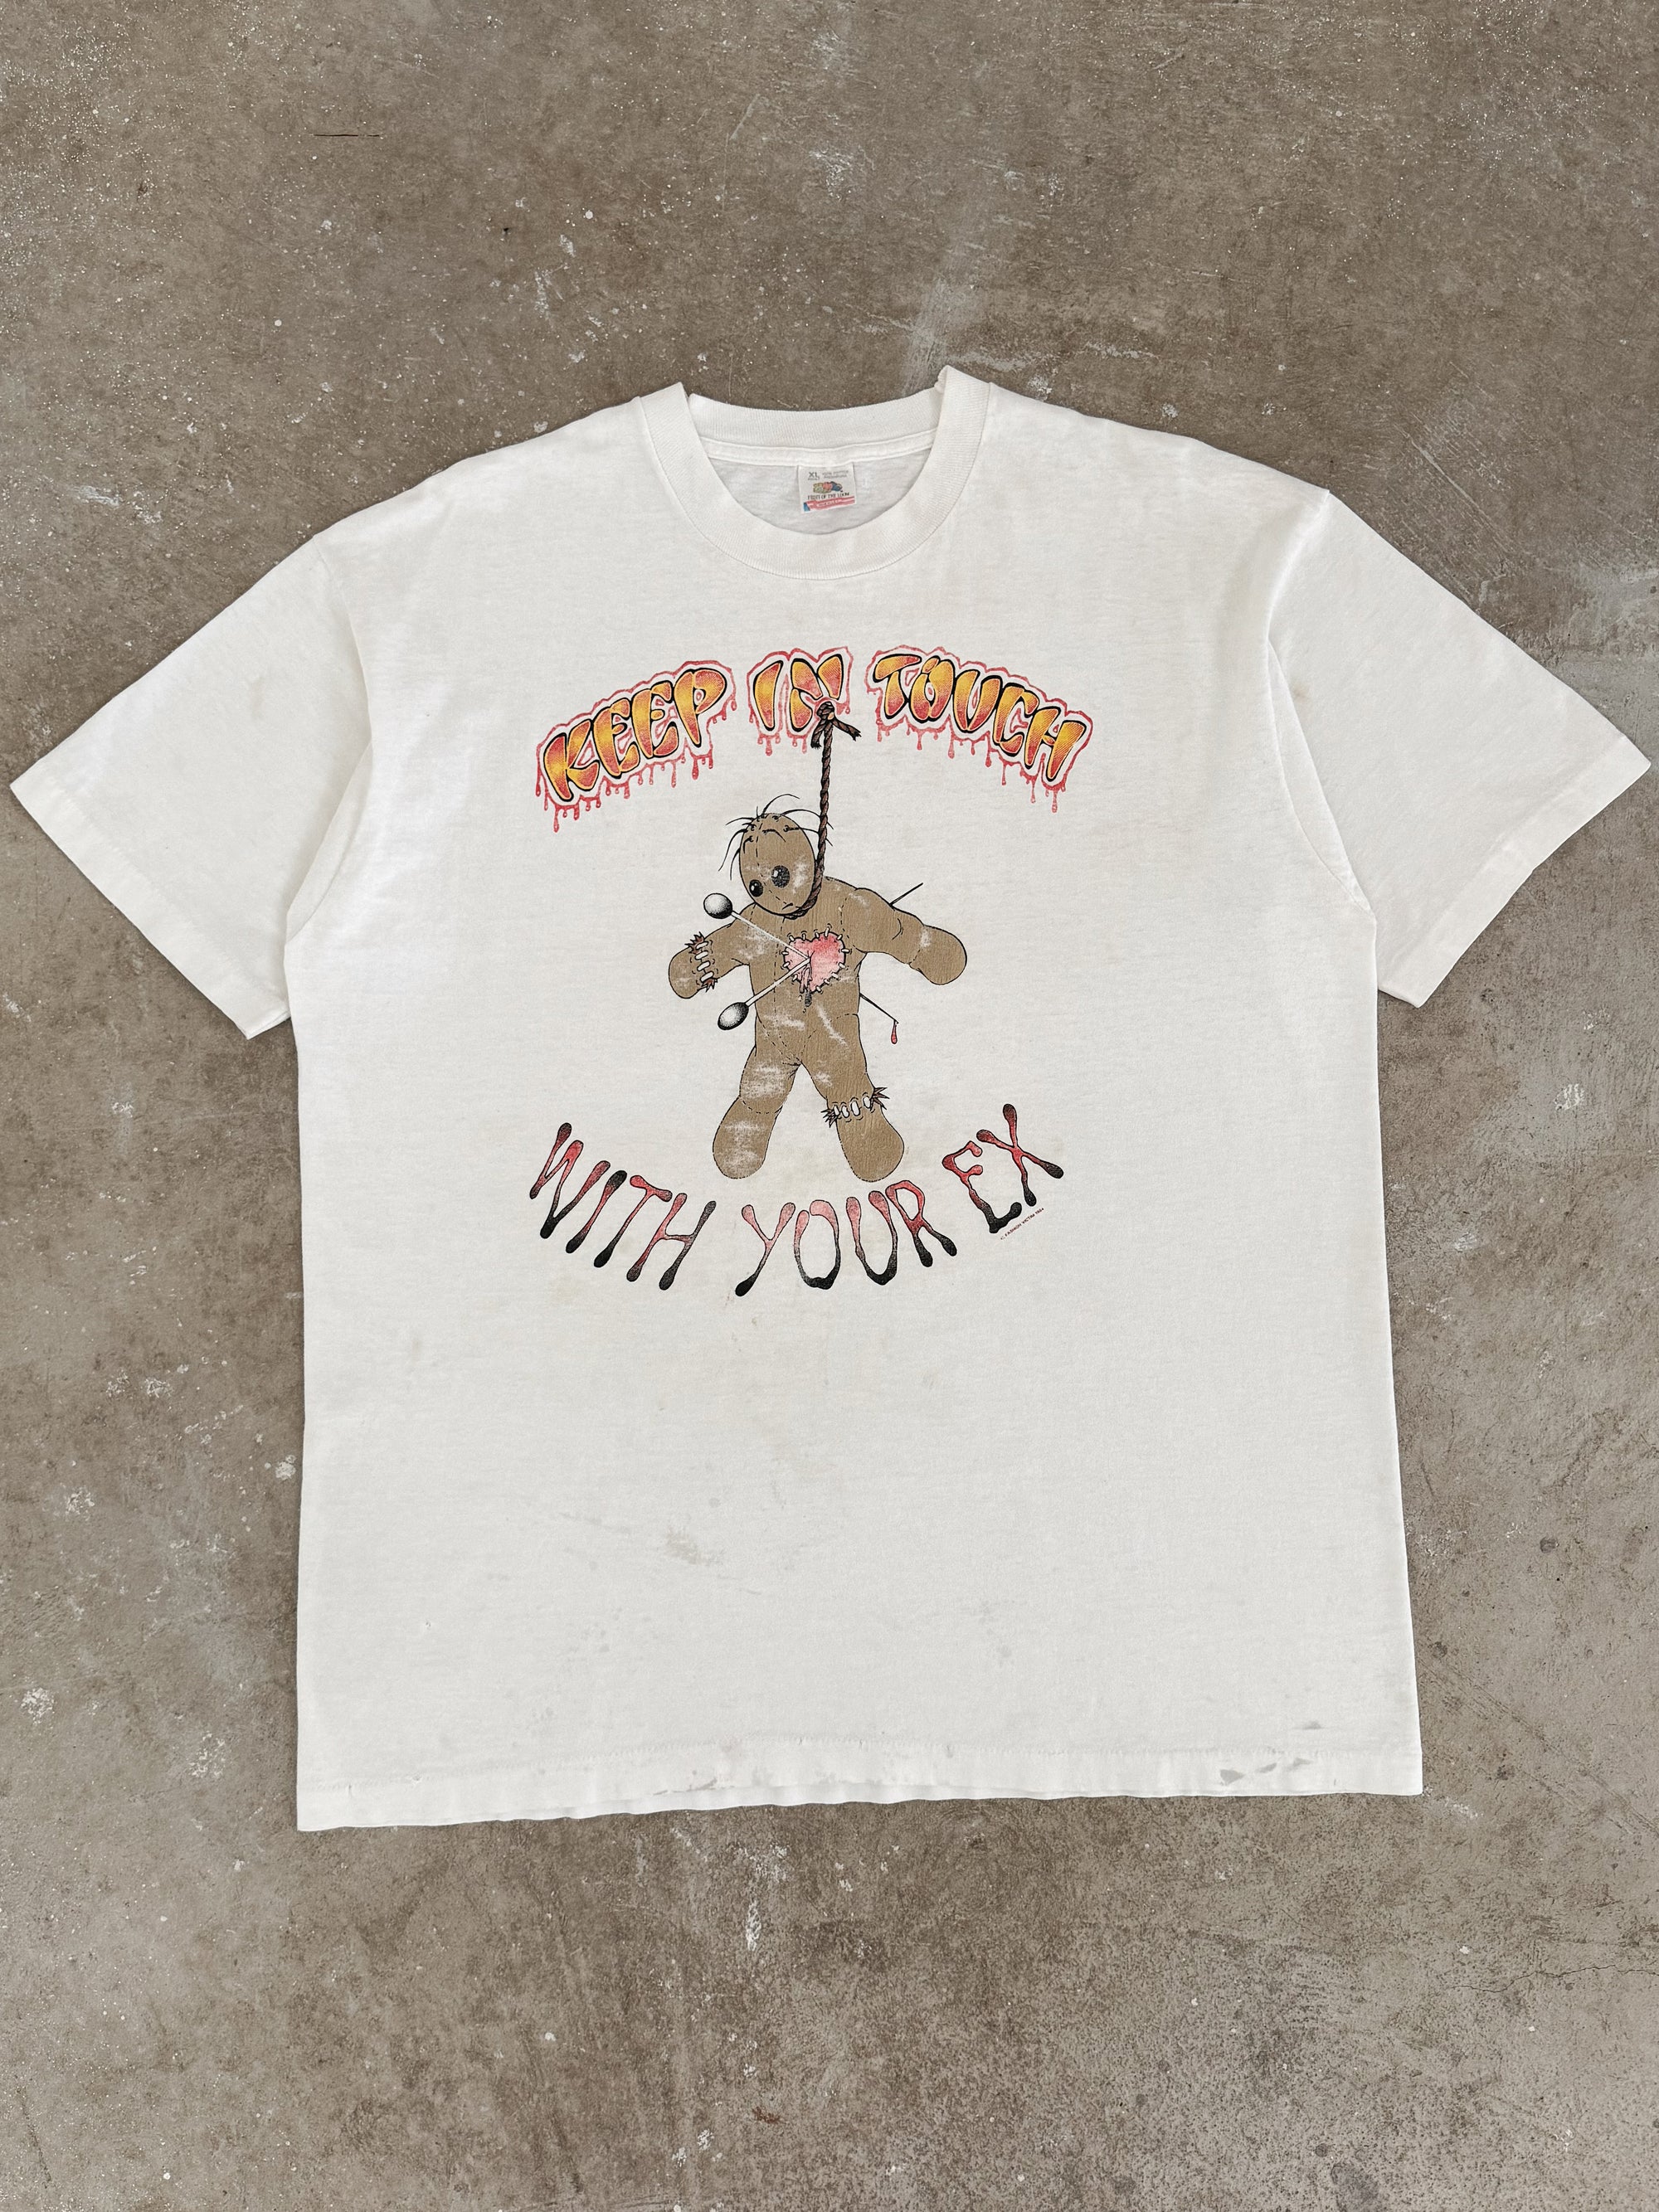 1990s "Keep In Touch With Your Ex" Fashion Victim Tee (XL)